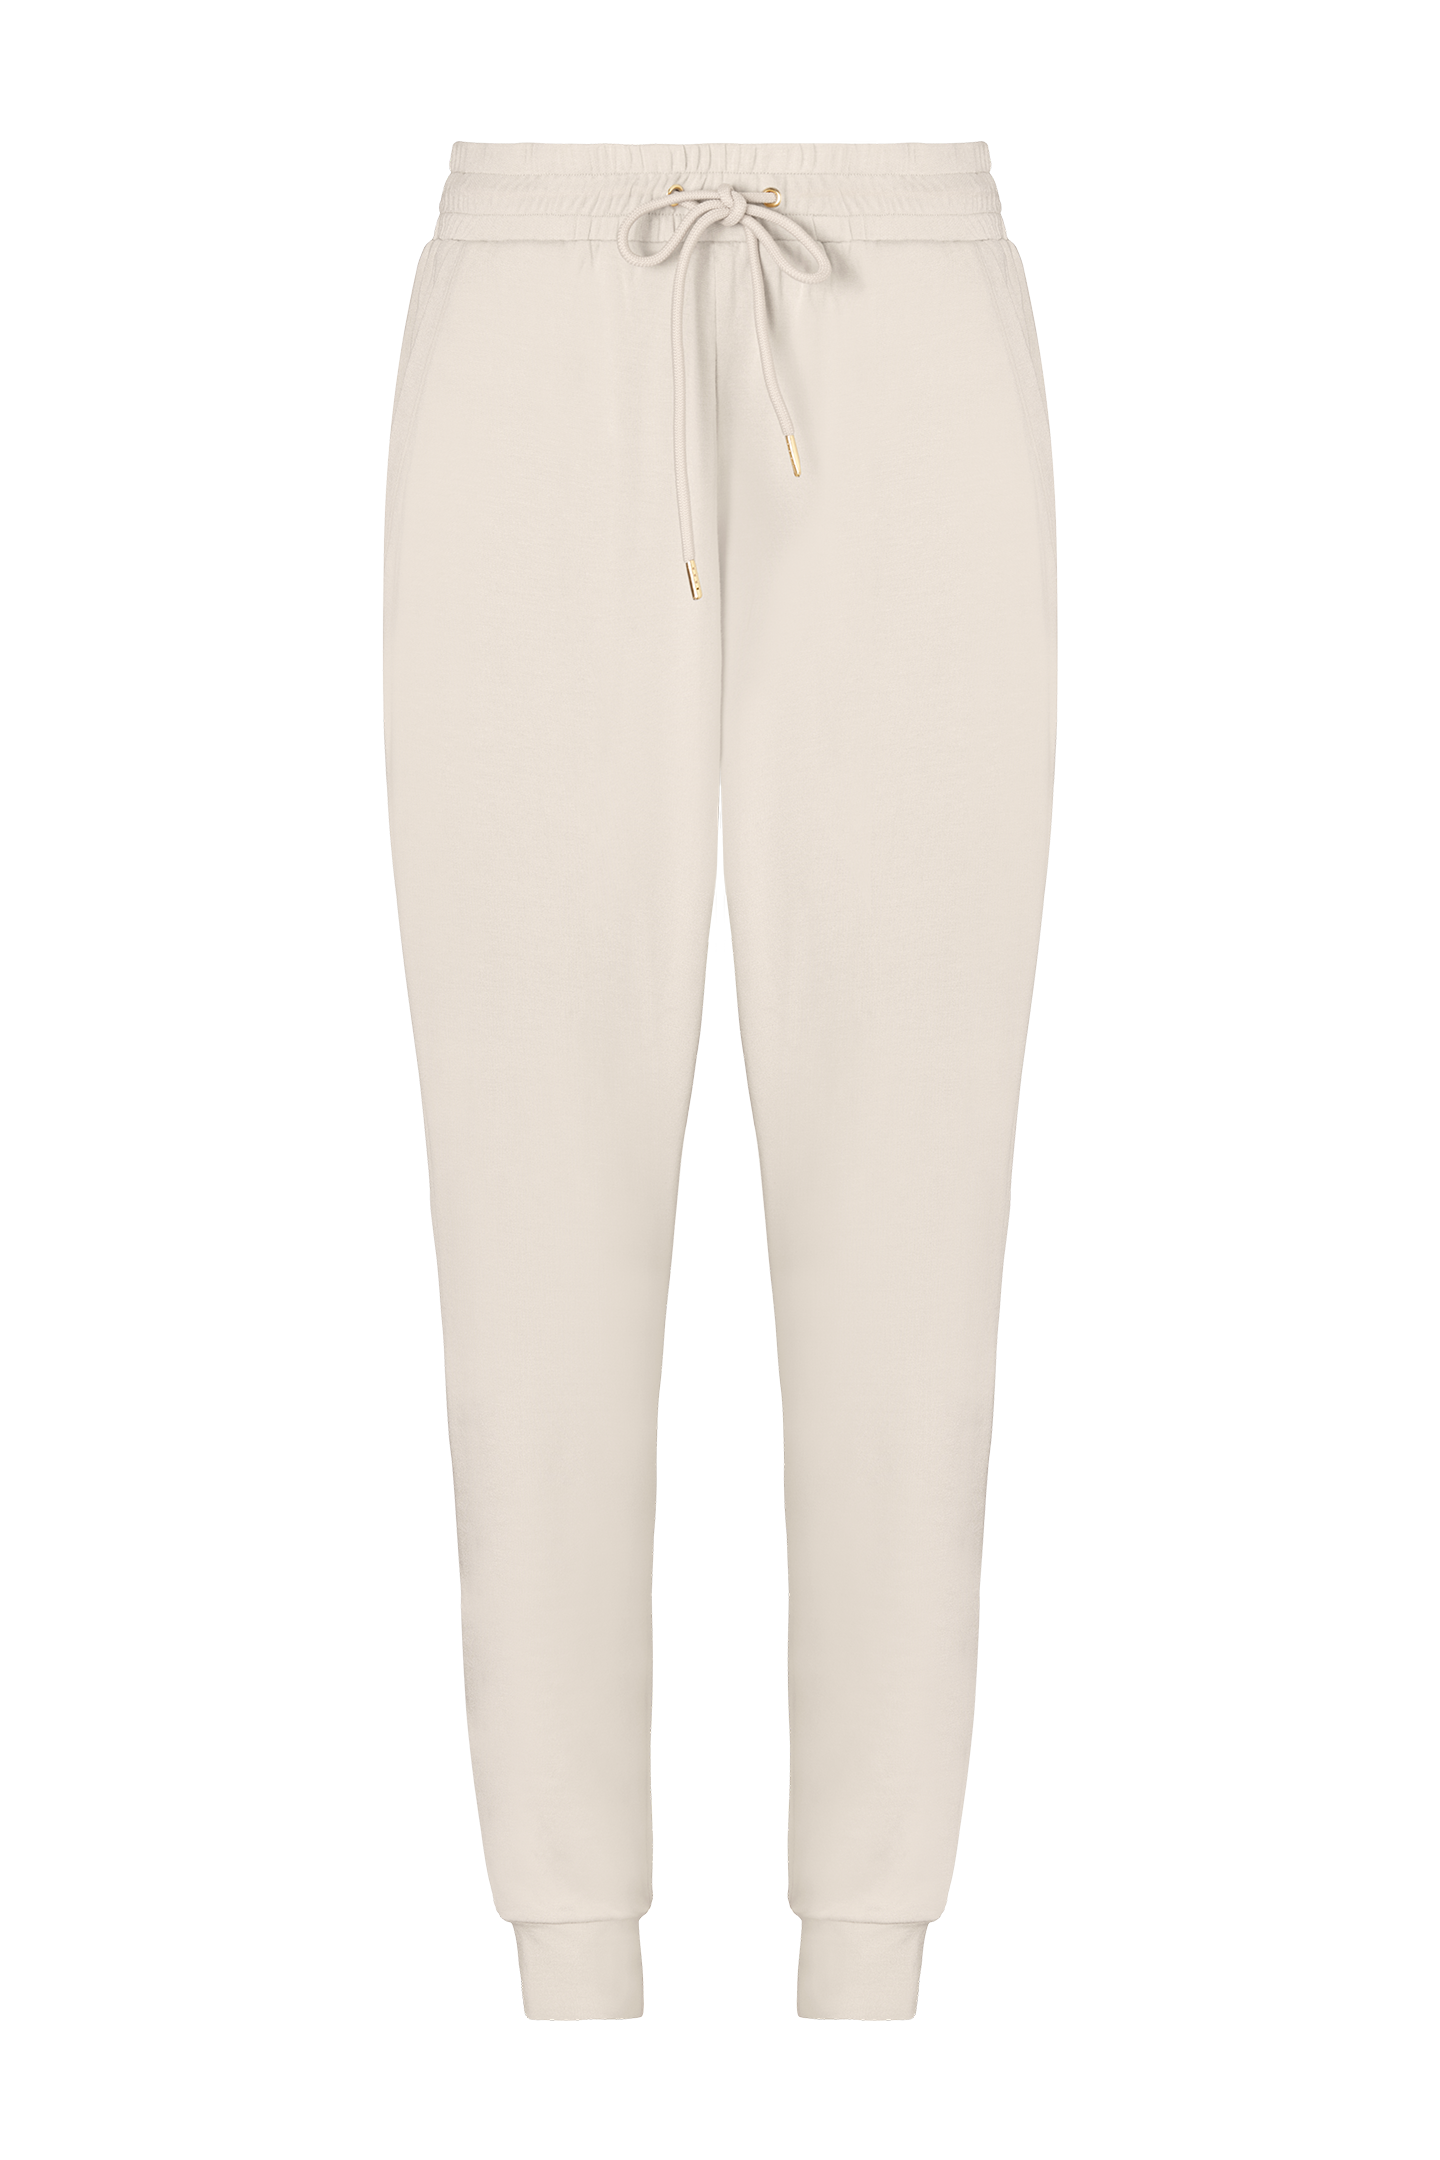 Buy ATHLEISURE PANT online at Intimo